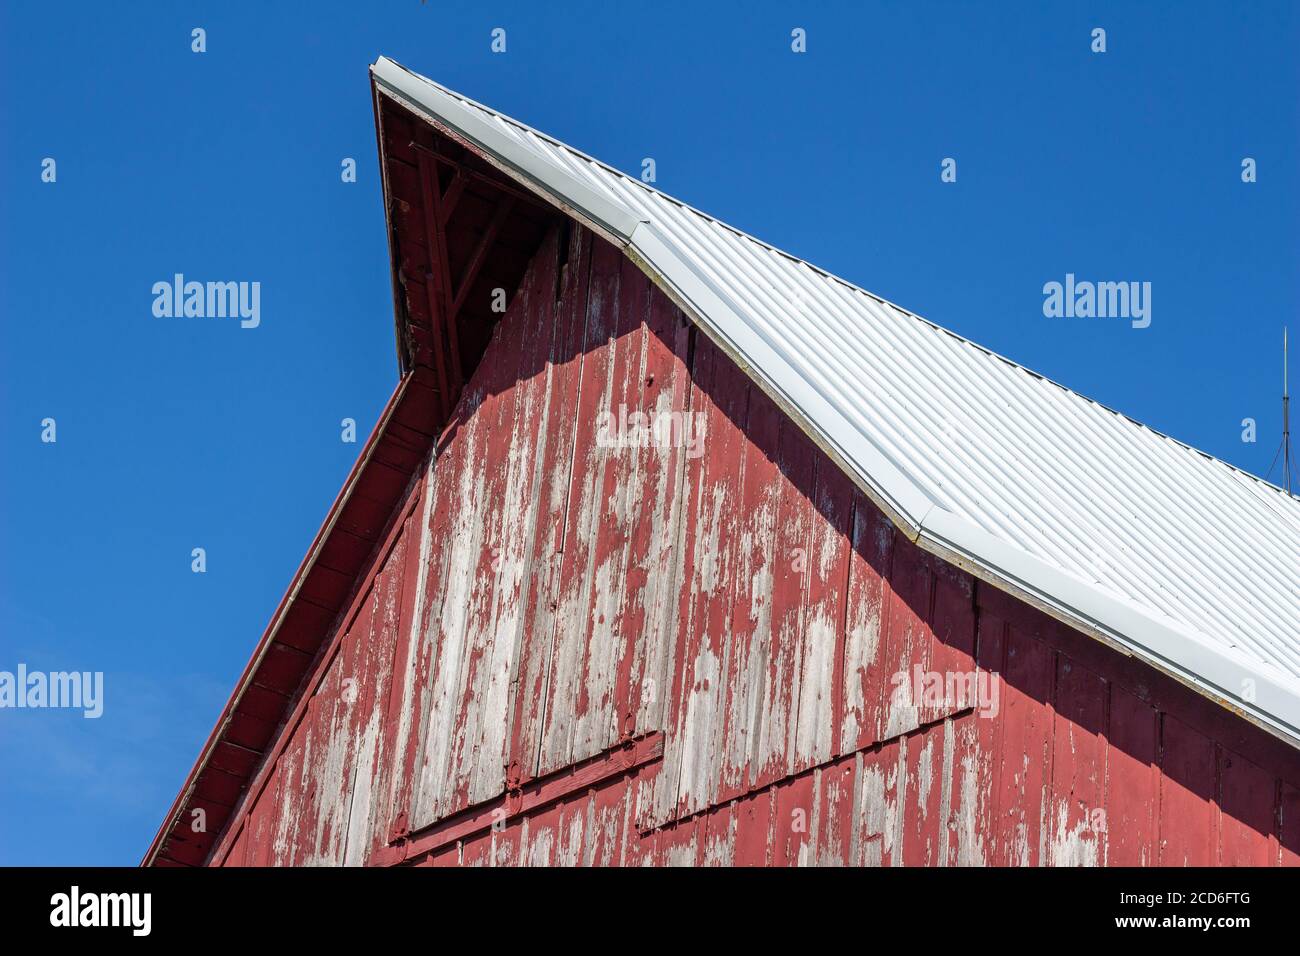 Close upward view of a hayloft door on a rustic late 19th Century wooden barn with blue sky and copy space Stock Photo